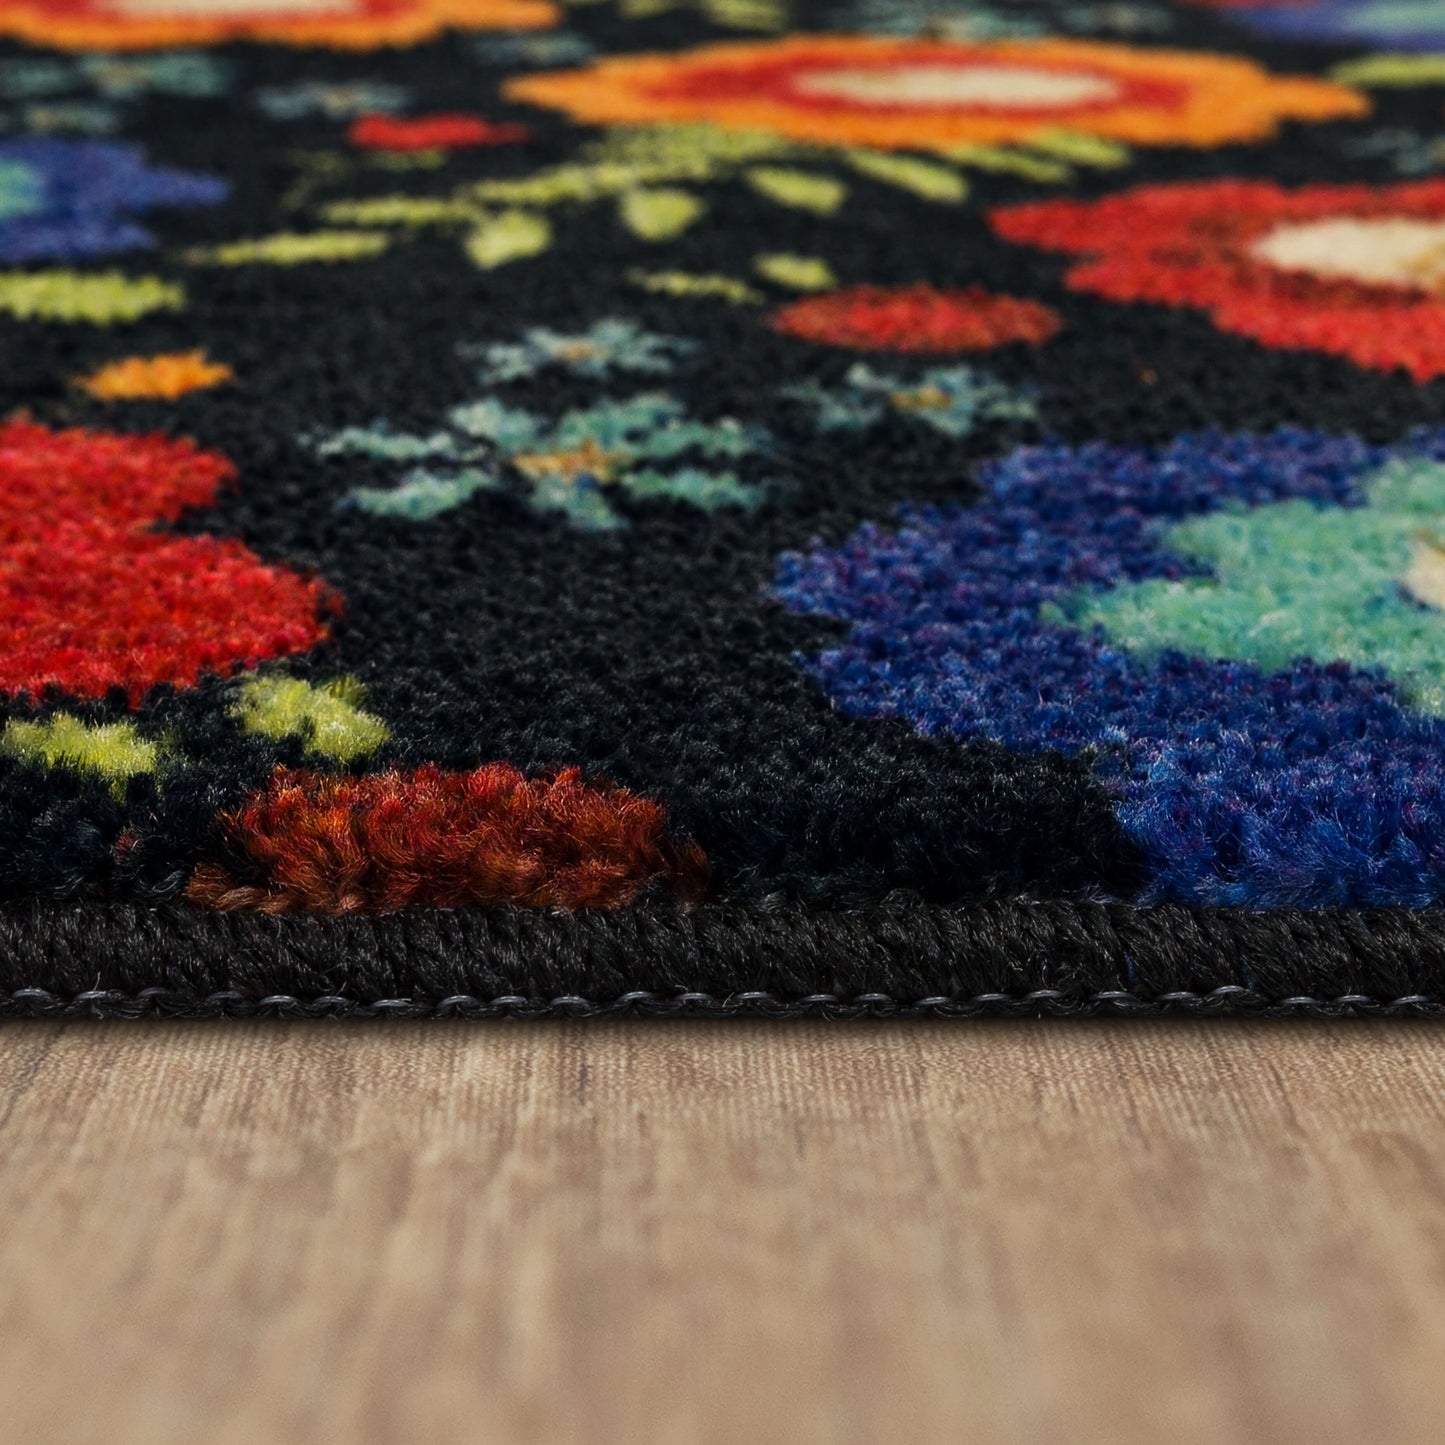 Colorful Garden Black Accent Rug